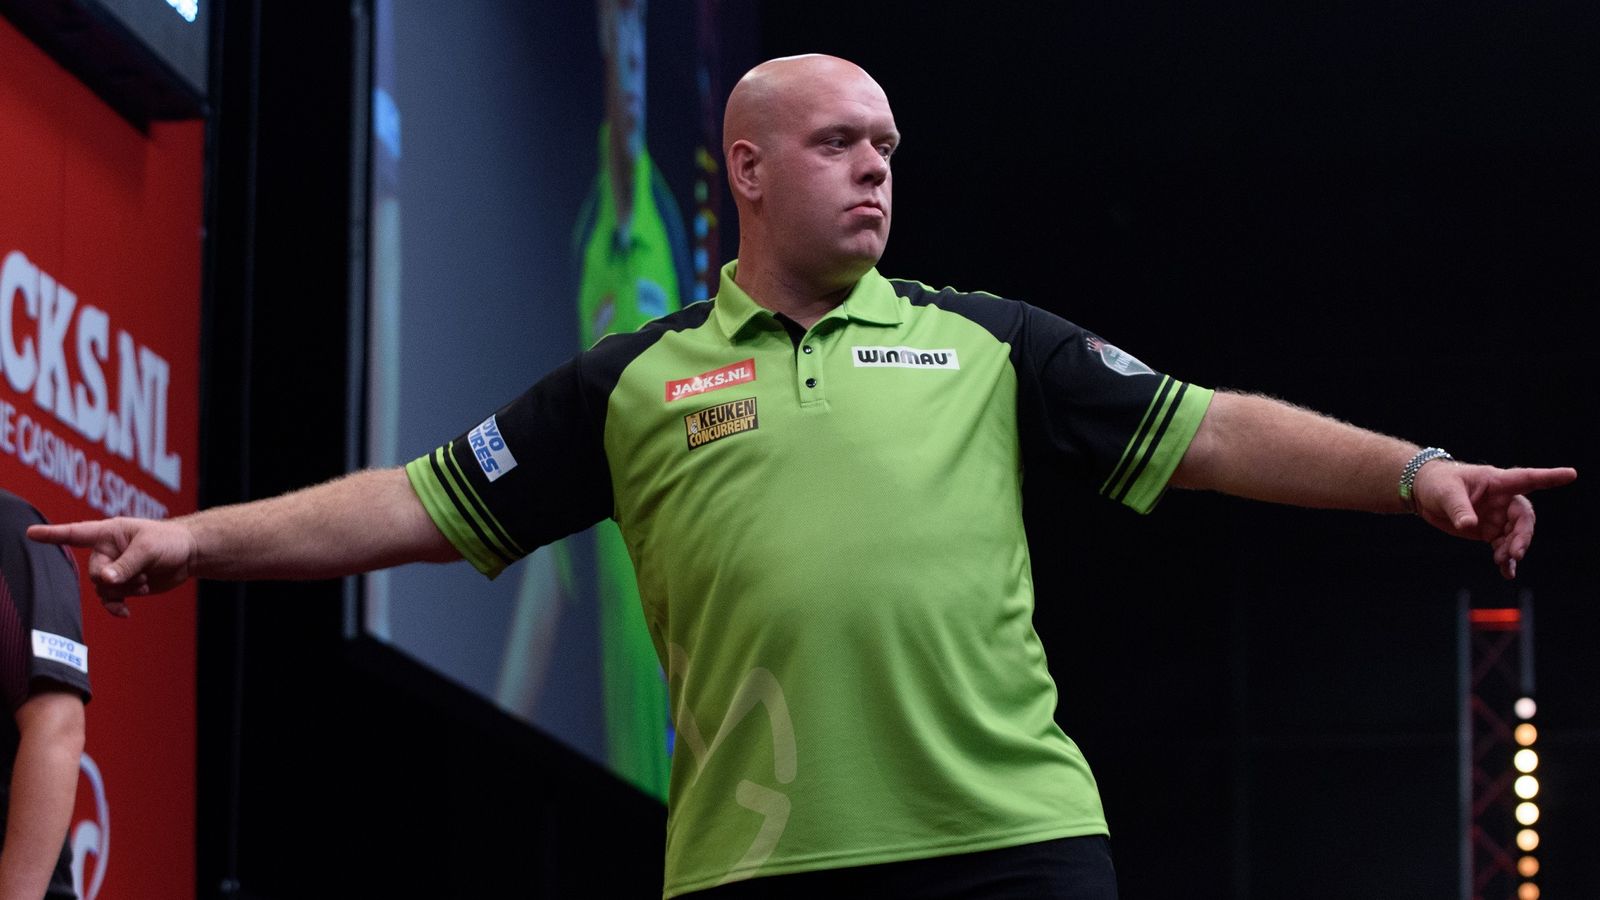 Michael van Gerwen beats Nathan Aspinall to win World Series of Darts for the fifth time in Amsterdam | Darts News